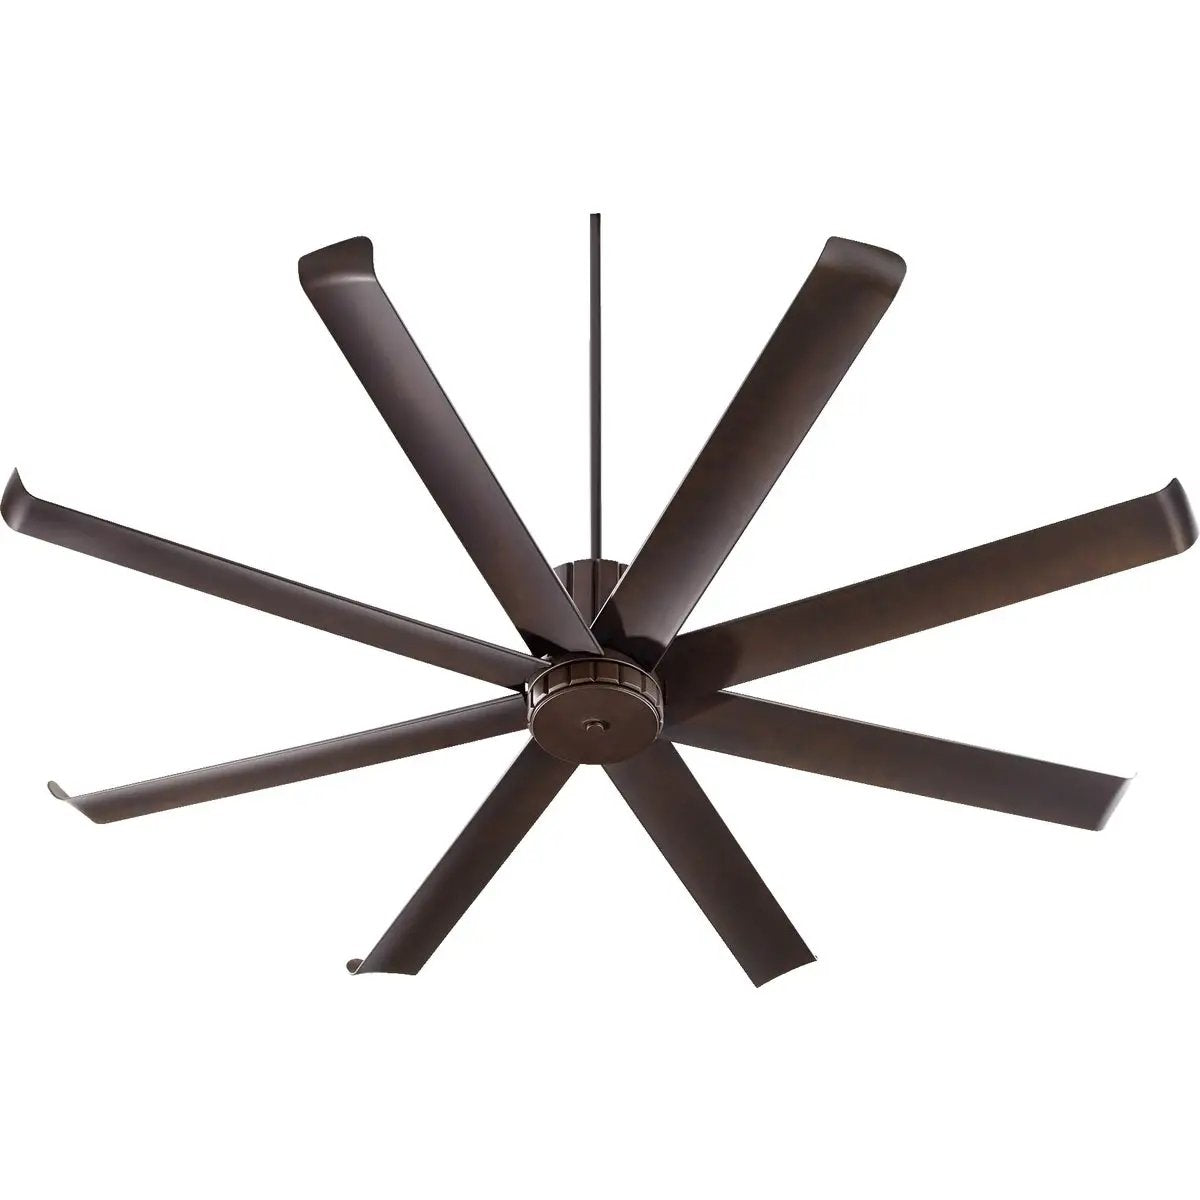 A sleek 72 inch ceiling fan with upturned blades for maximum air circulation. The cylindrical housing adds contemporary artistry to its beauty.